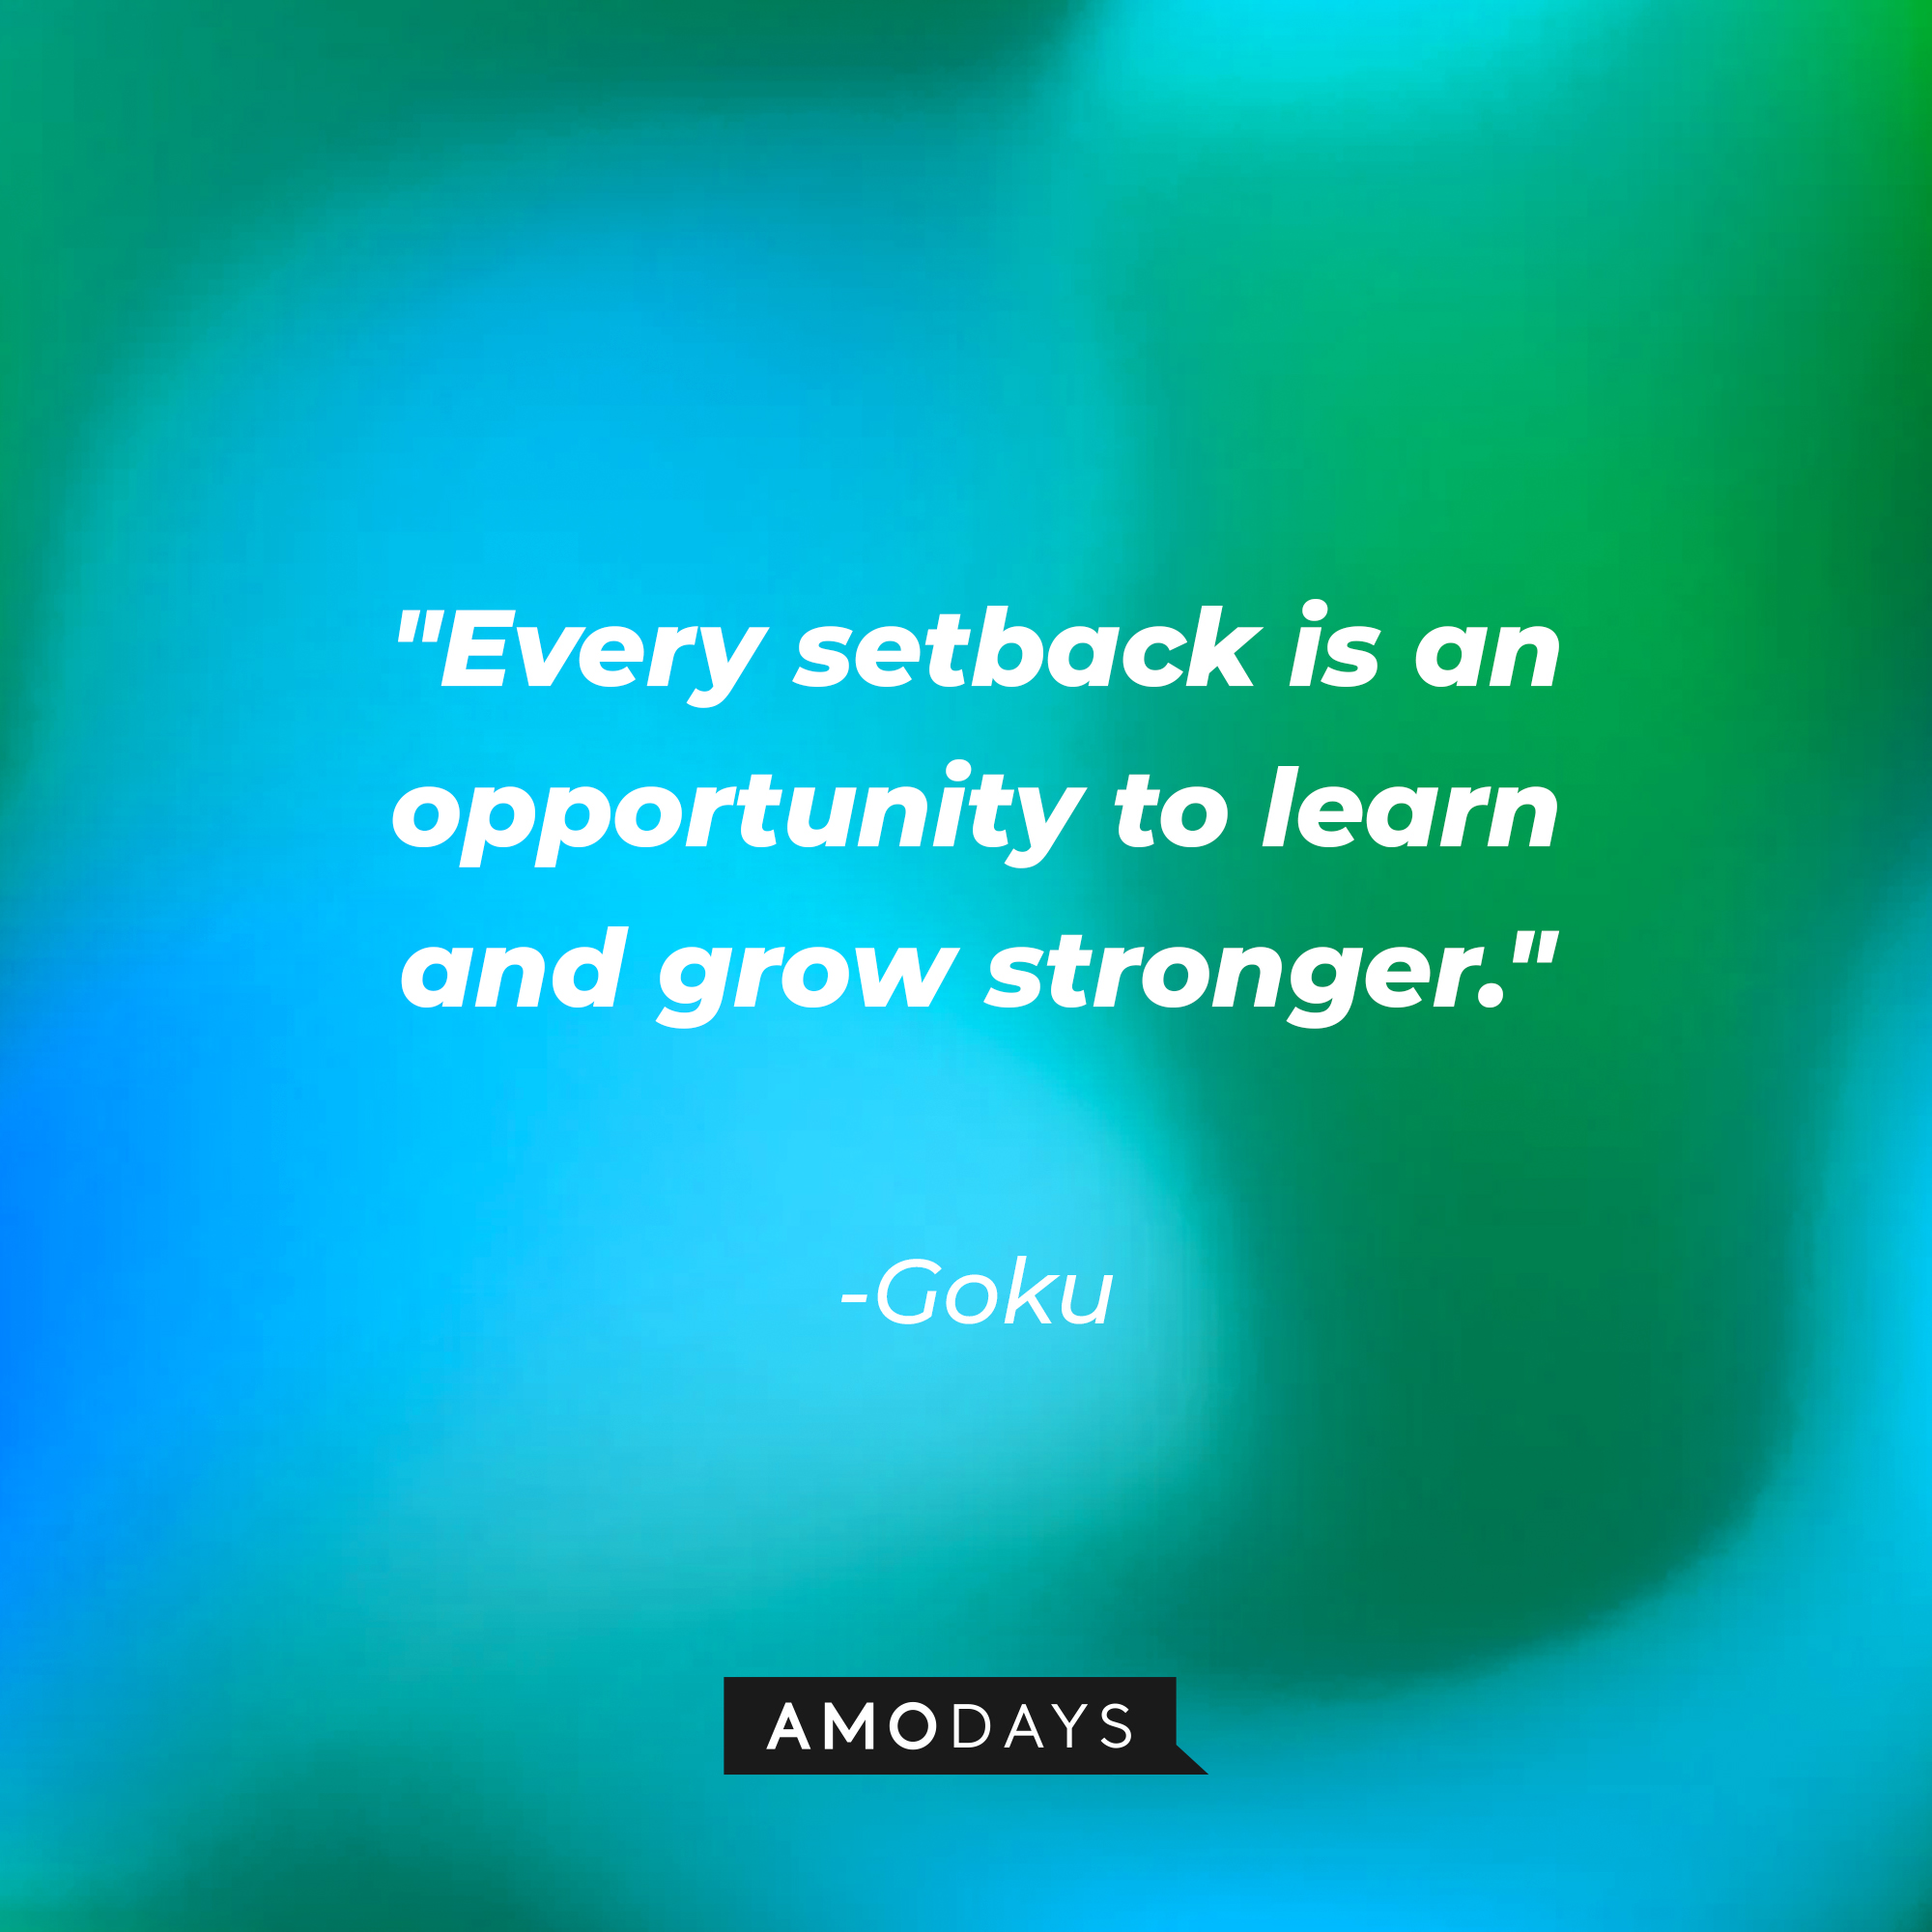 Goku's quote: "Every setback is an opportunity to learn and grow stronger." | Source: youtube.com/DragonballBlack